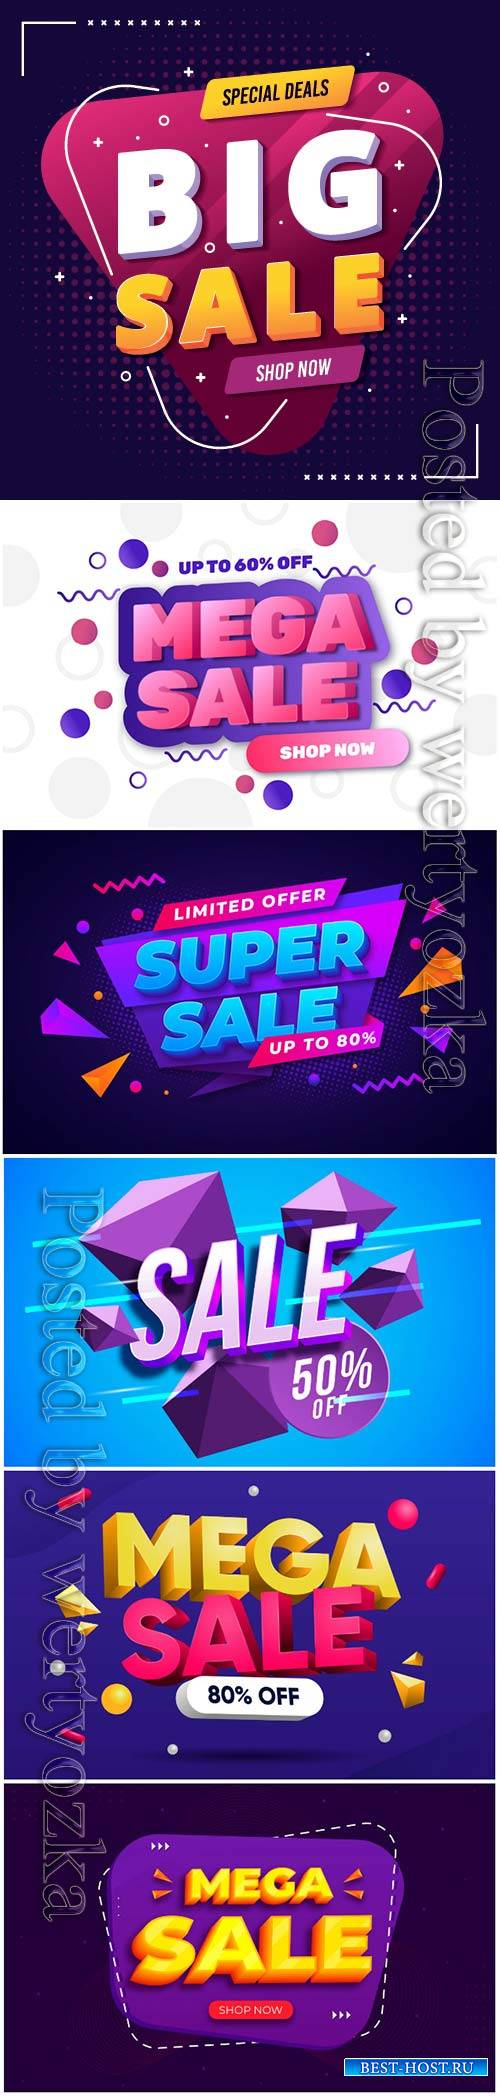 Colorful 3d sales vector background # 3